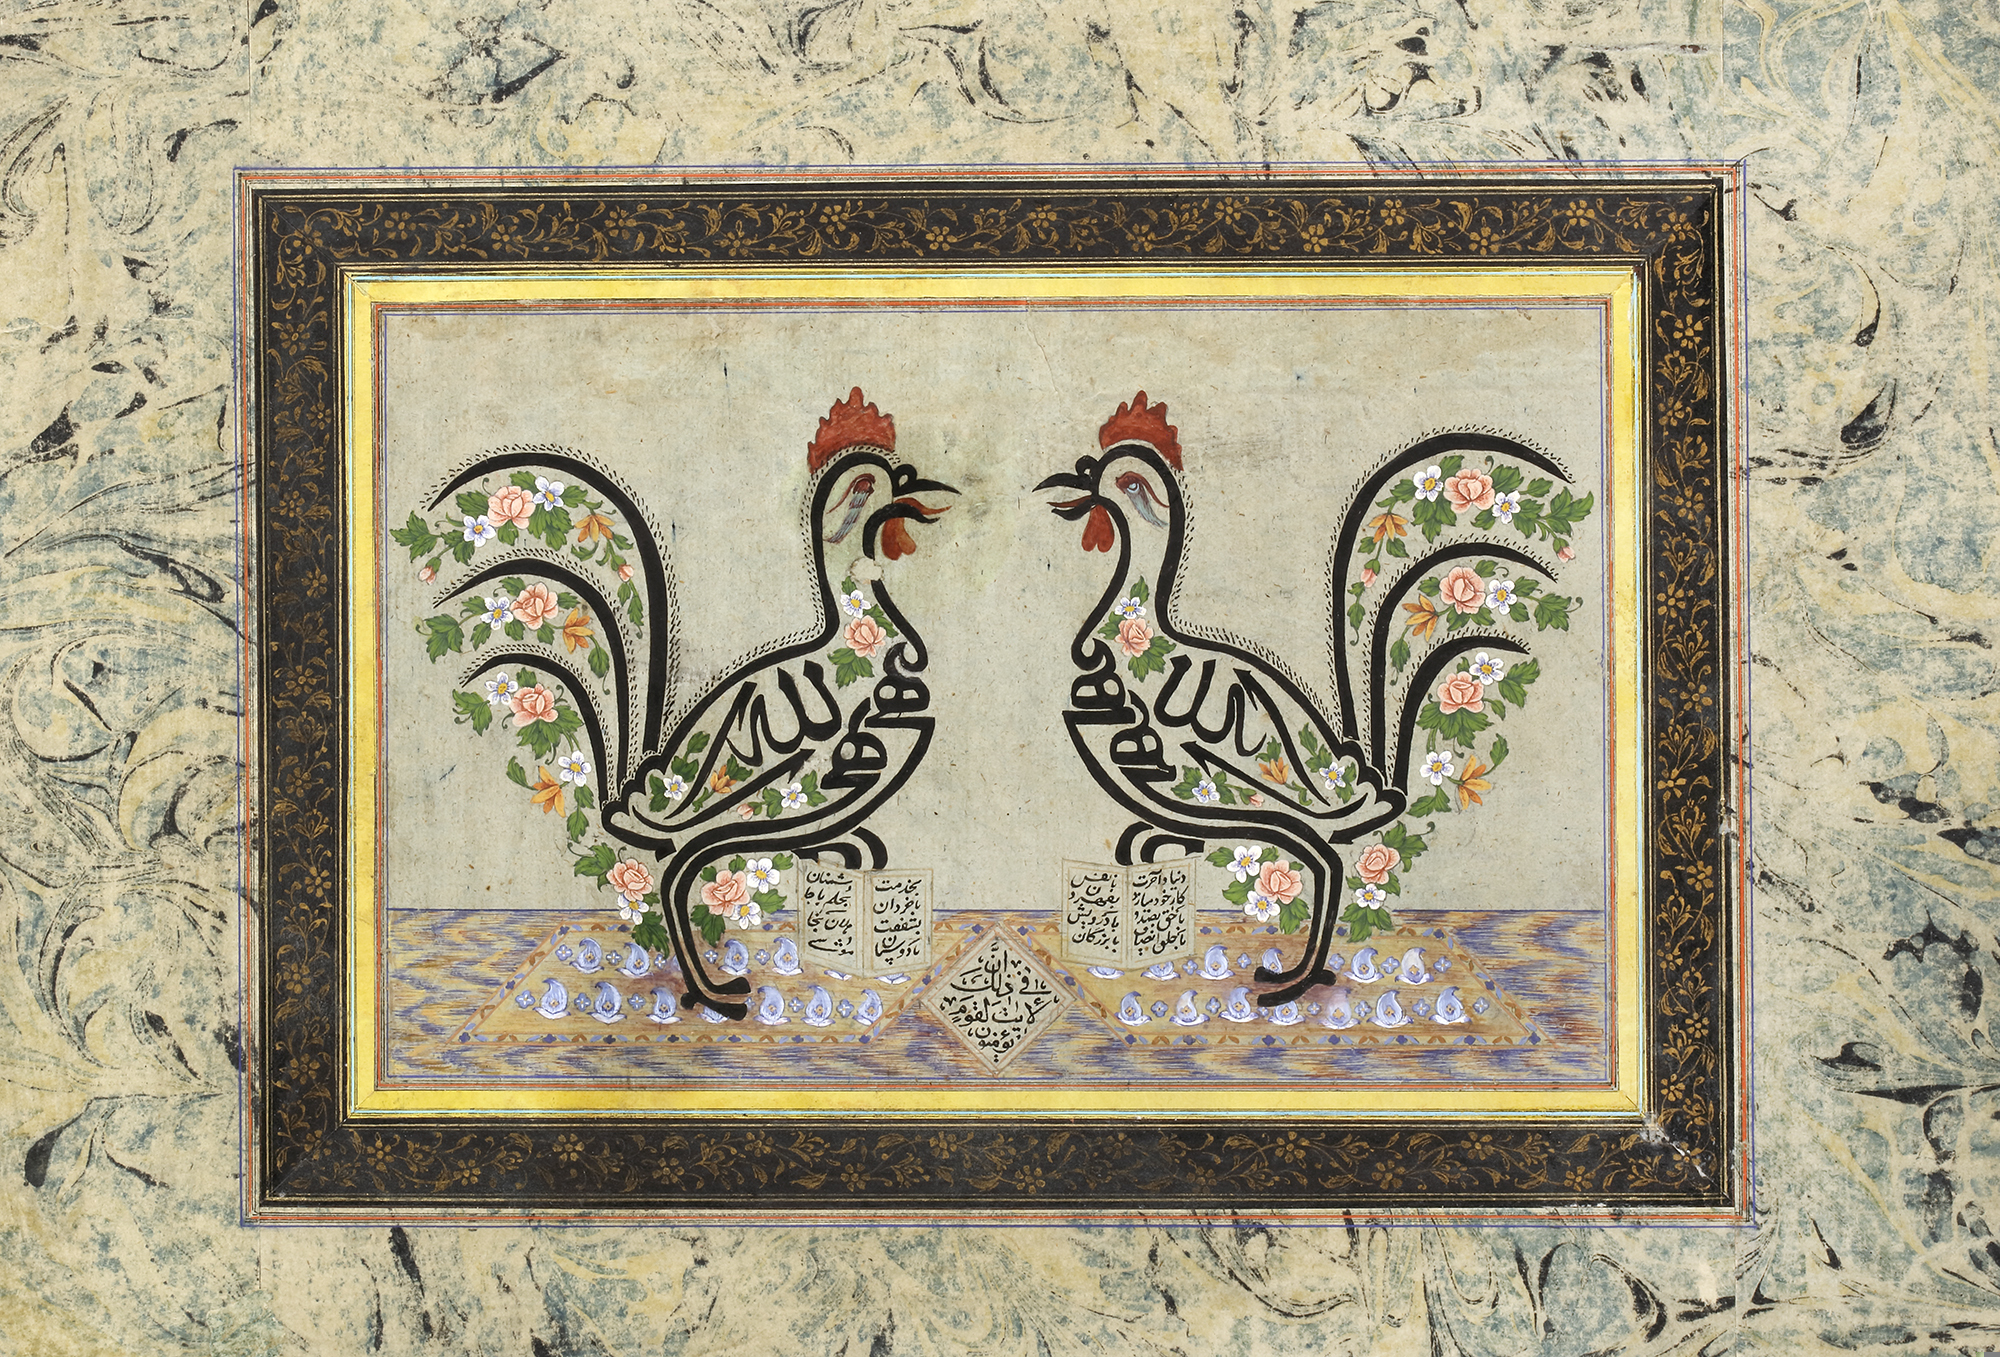 A FIGURAL CALLIGRAPHIC COMPOSITION, PERSIA 20TH CENTURY - Image 2 of 2